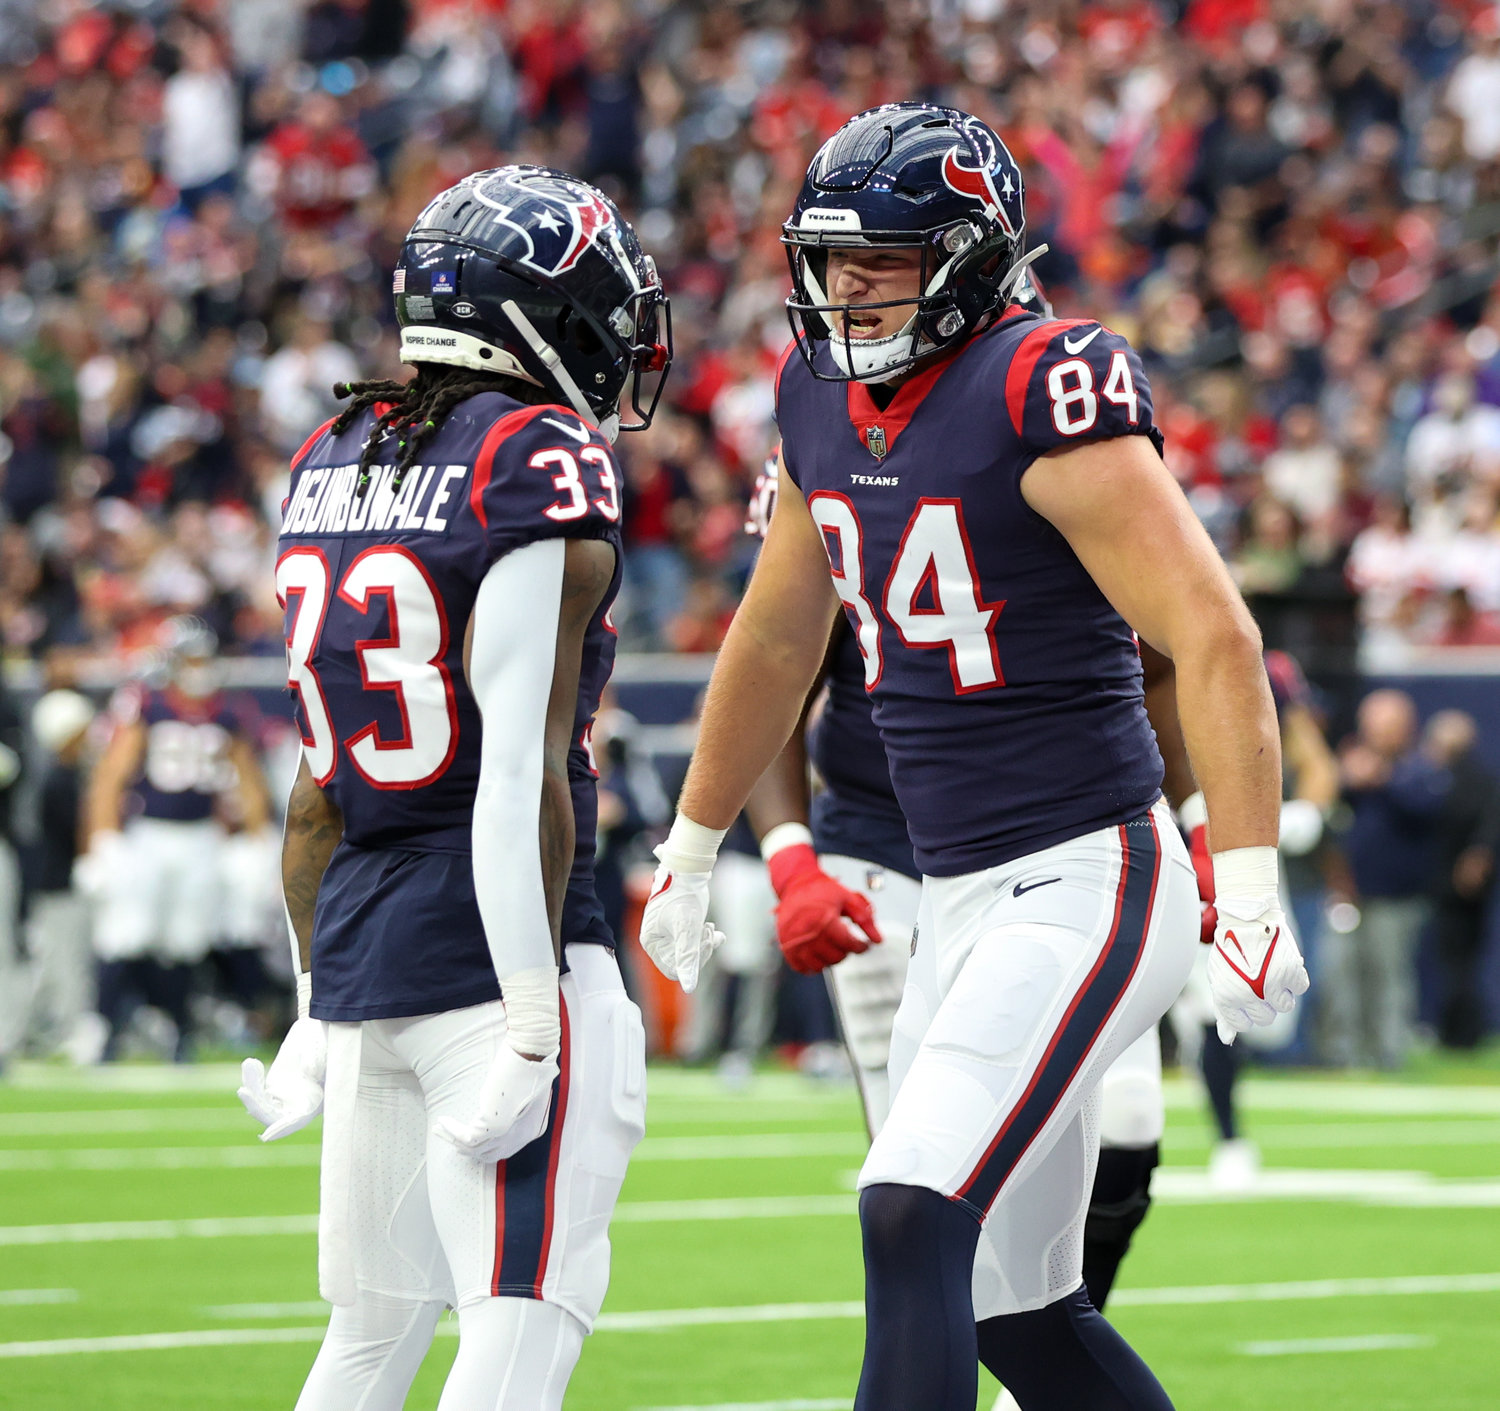 Houston Texans running back Dare Ogunbowale (33) celebrates with tight end Teagan Quitoriano (84) after a touchdown during an NFL game between the Texans and the Chiefs on Dec. 18, 2022, in Houston. The Chiefs won, 30-24, in overtime.